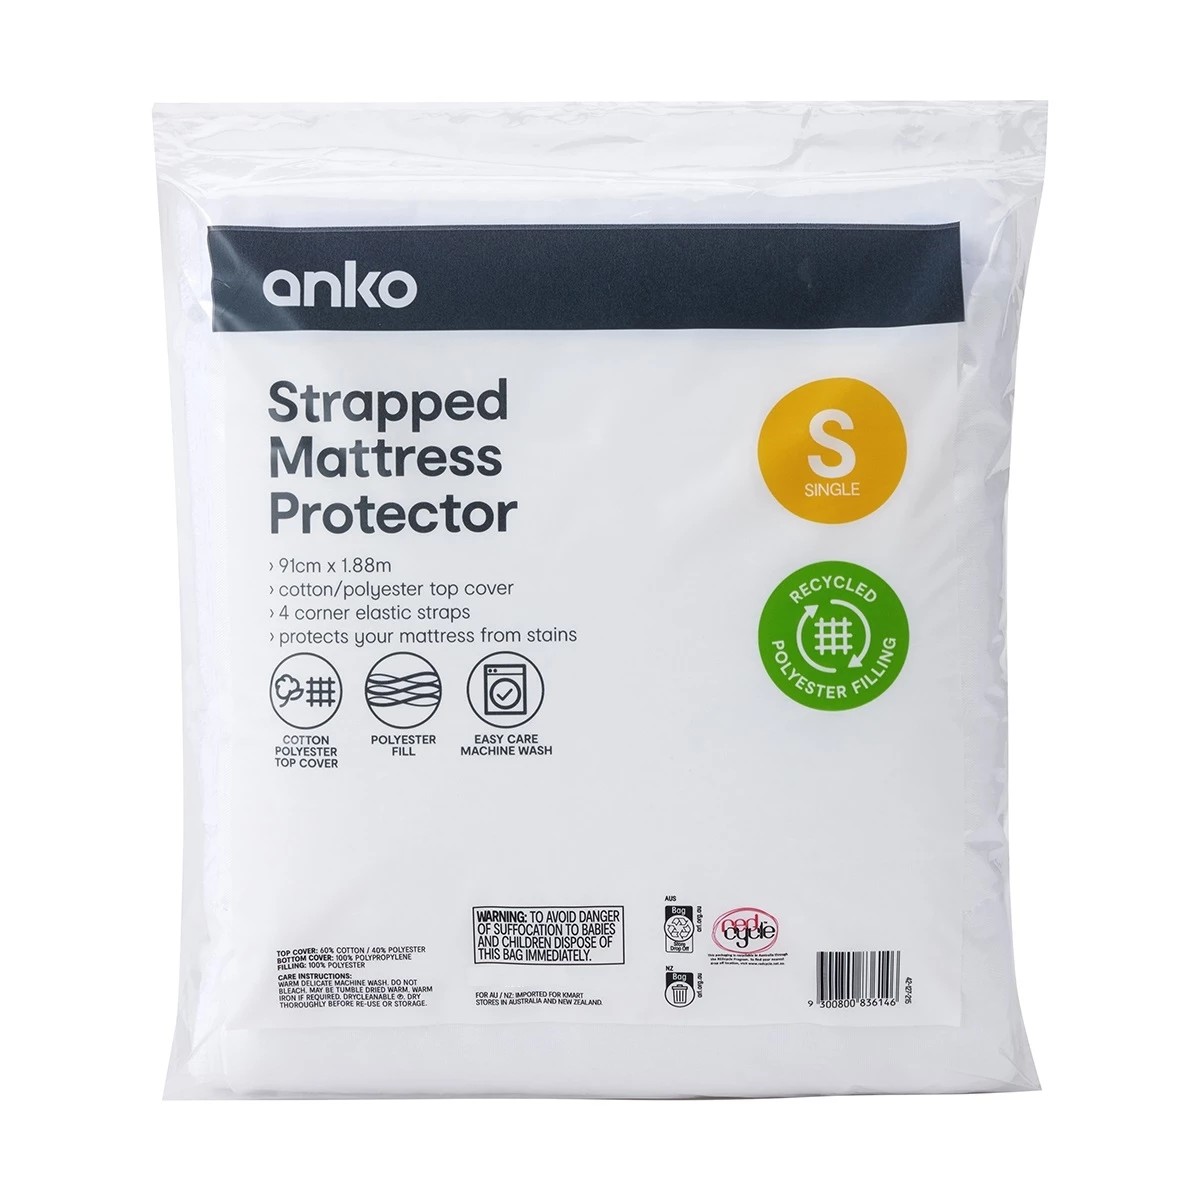 Strapped Mattress Protector, Single Bed - Anko | Target Australia